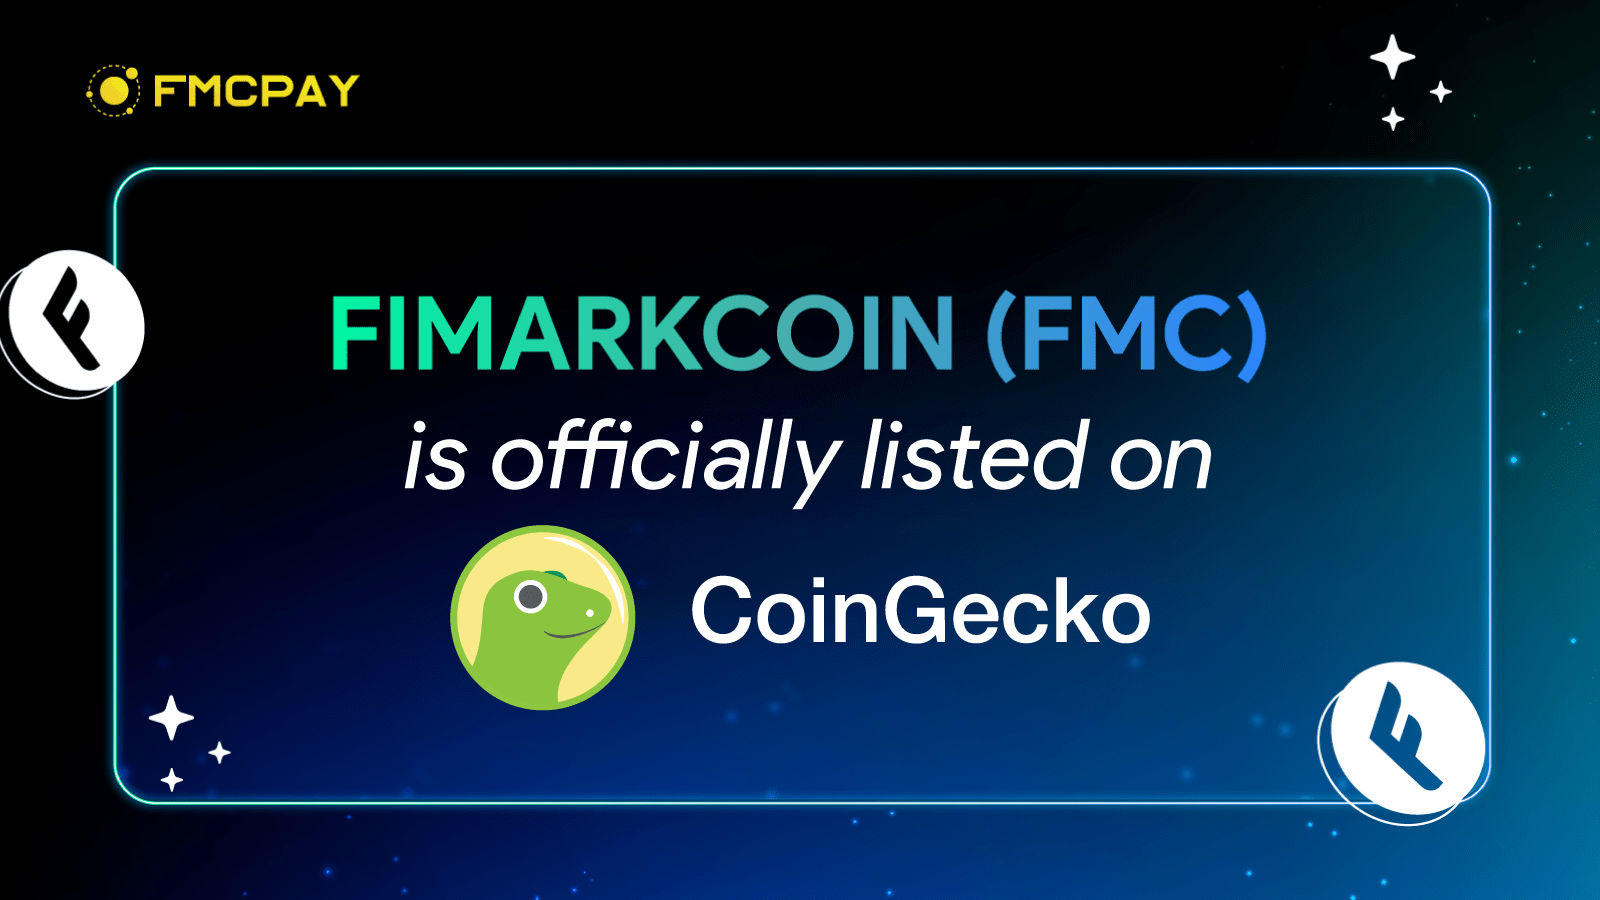 fimarkcoin fmc is officially listed on coingecko